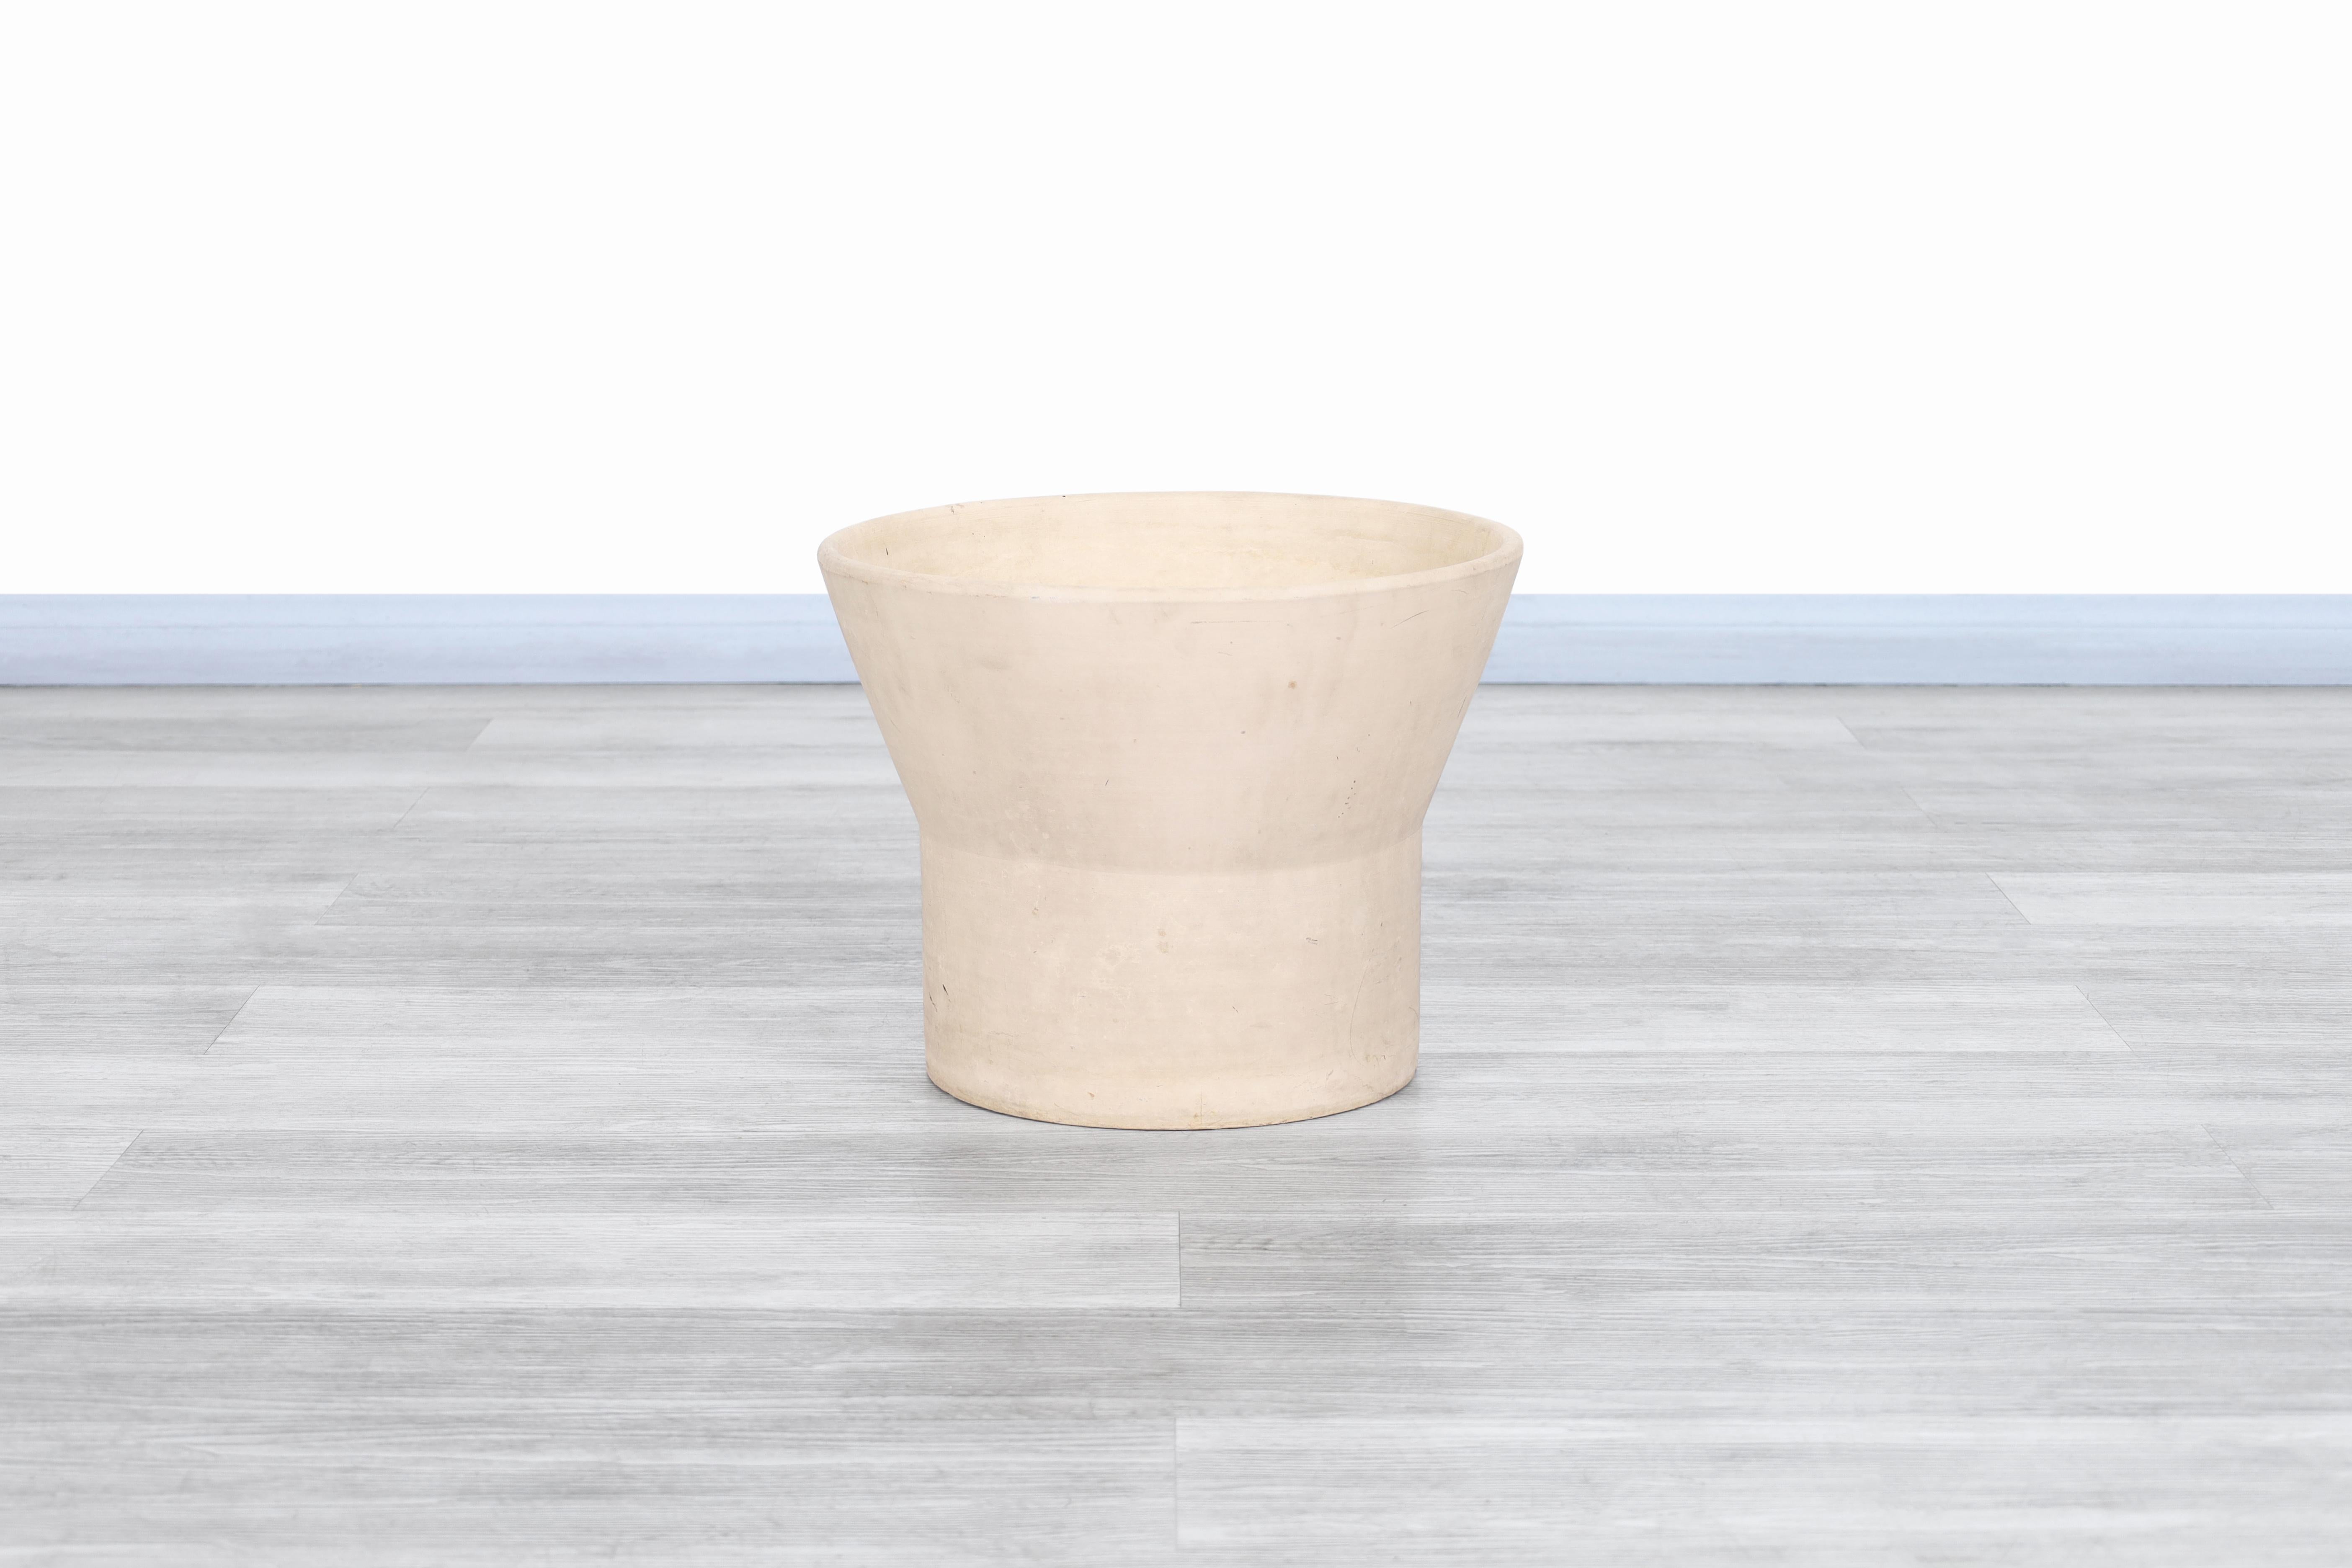 Exceptional ceramic planter model “M-2” designed by Paul McCobb for Architectural Pottery in the United States, circa 1960s. This planter has a shape that starts from a narrow neck and expands its lines tracing an even wider contour at the top. It